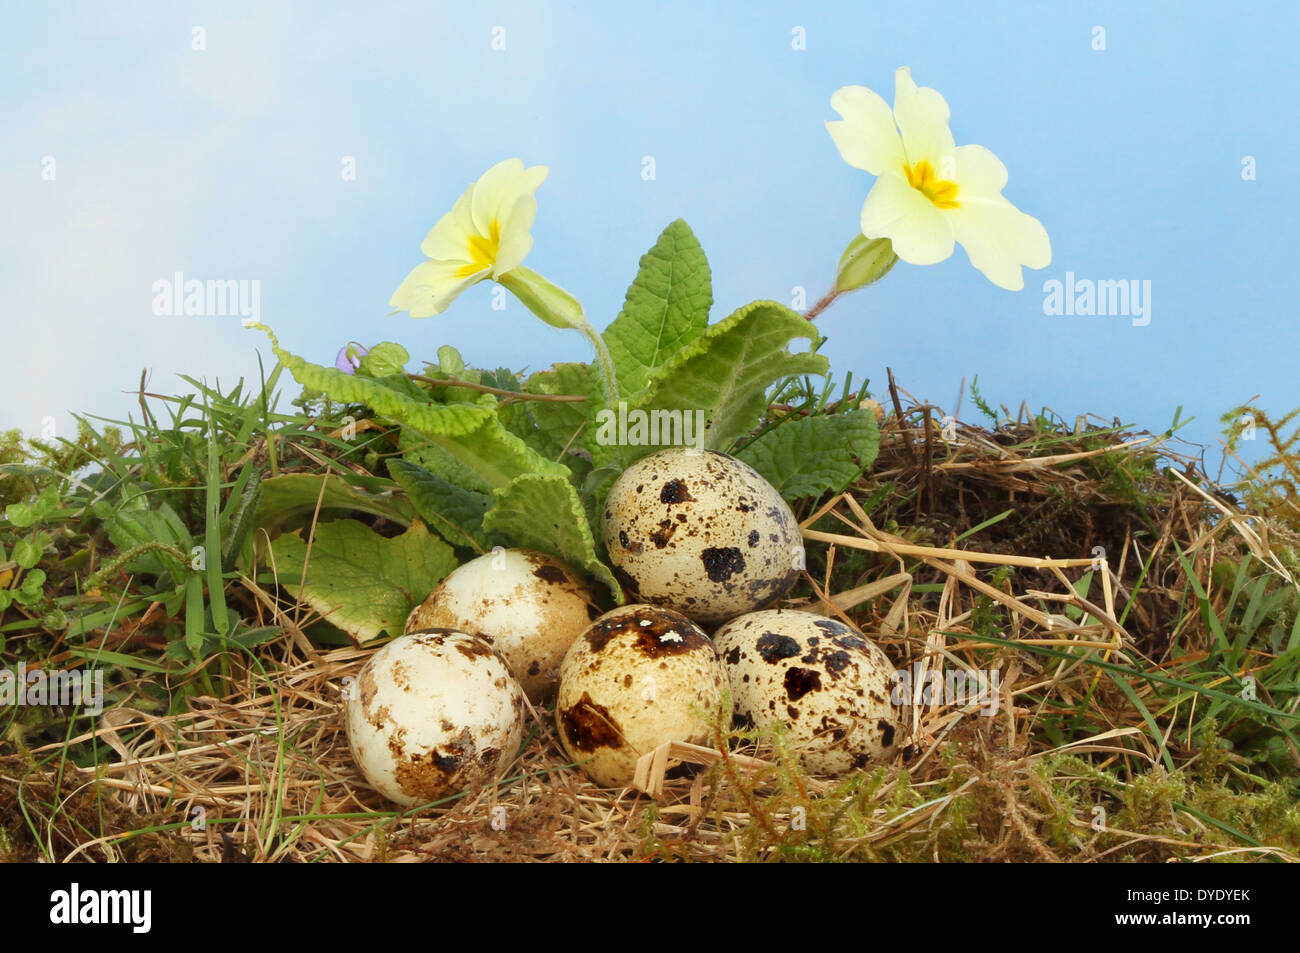 Birds eggs in a nest of straw and moss underneath a flowering primrose against a blue sky with hazy white cloud Stock Photo